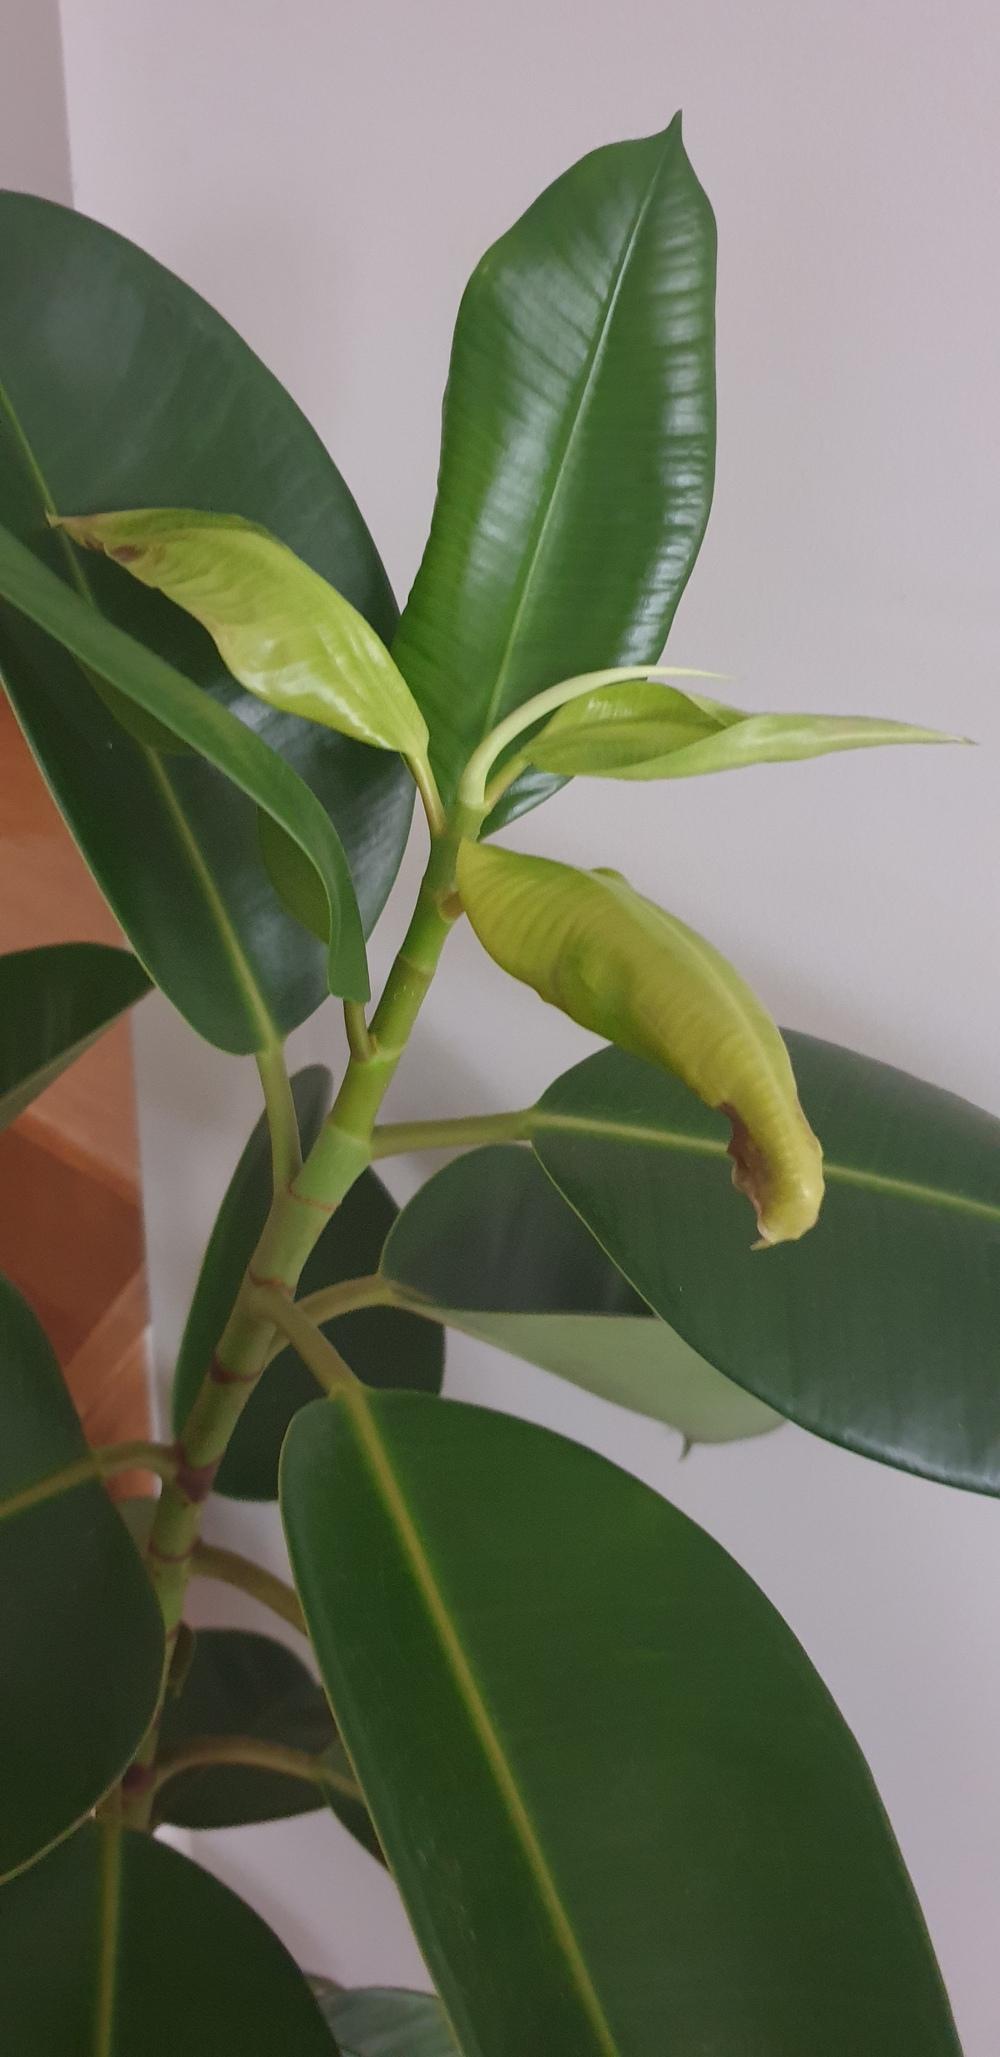 Photo of Rubber Plant (Ficus elastica) uploaded by Maddi123456